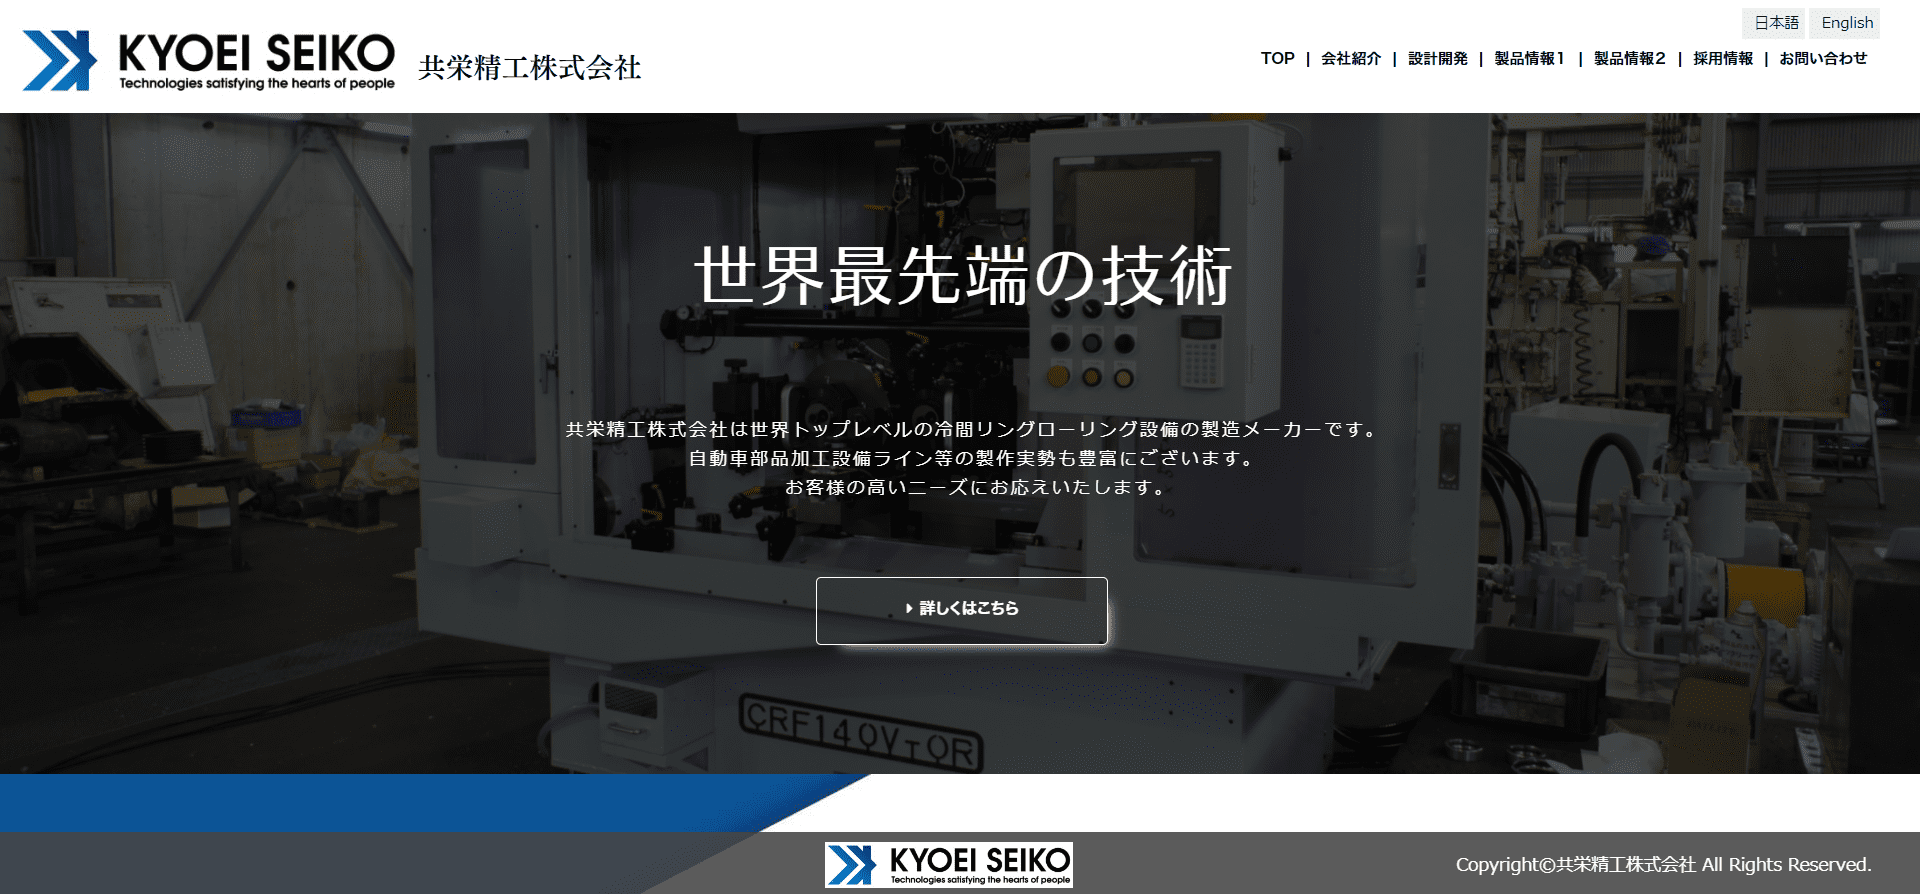 Fully automated lines｜Kyoei Seiko Co., Ltd. (official homepage)